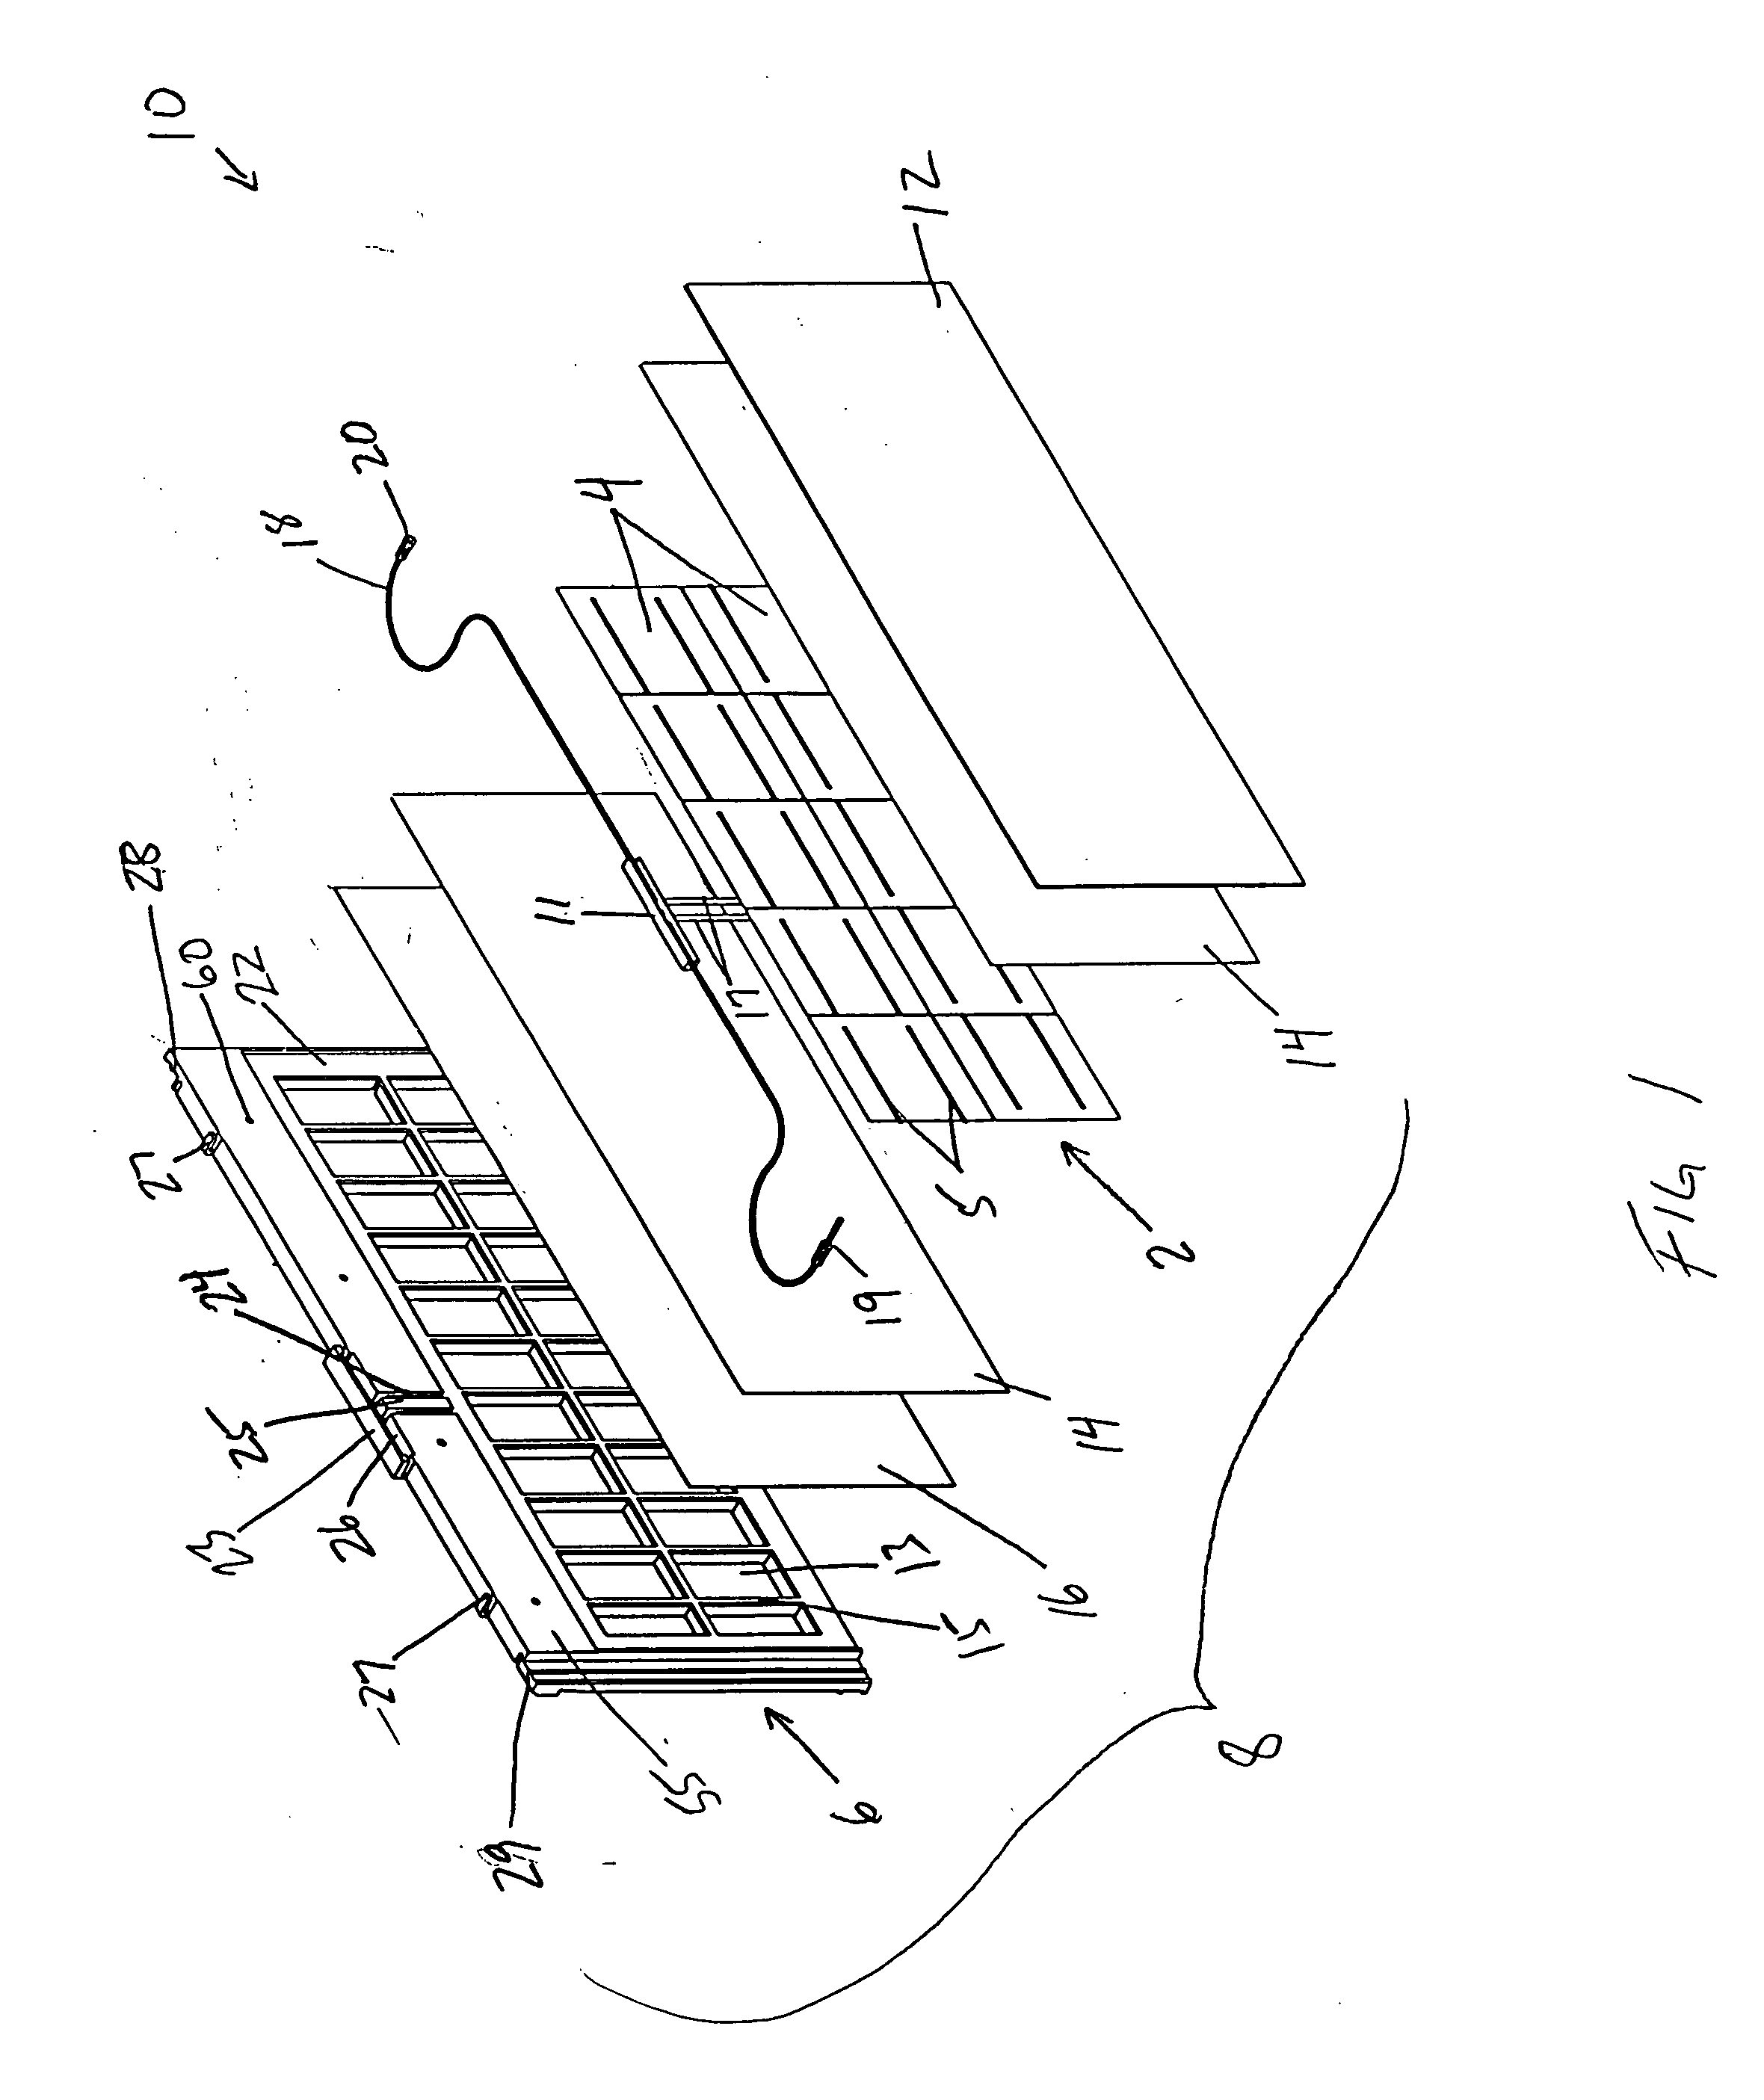 System and method for mounting photovoltaic cells